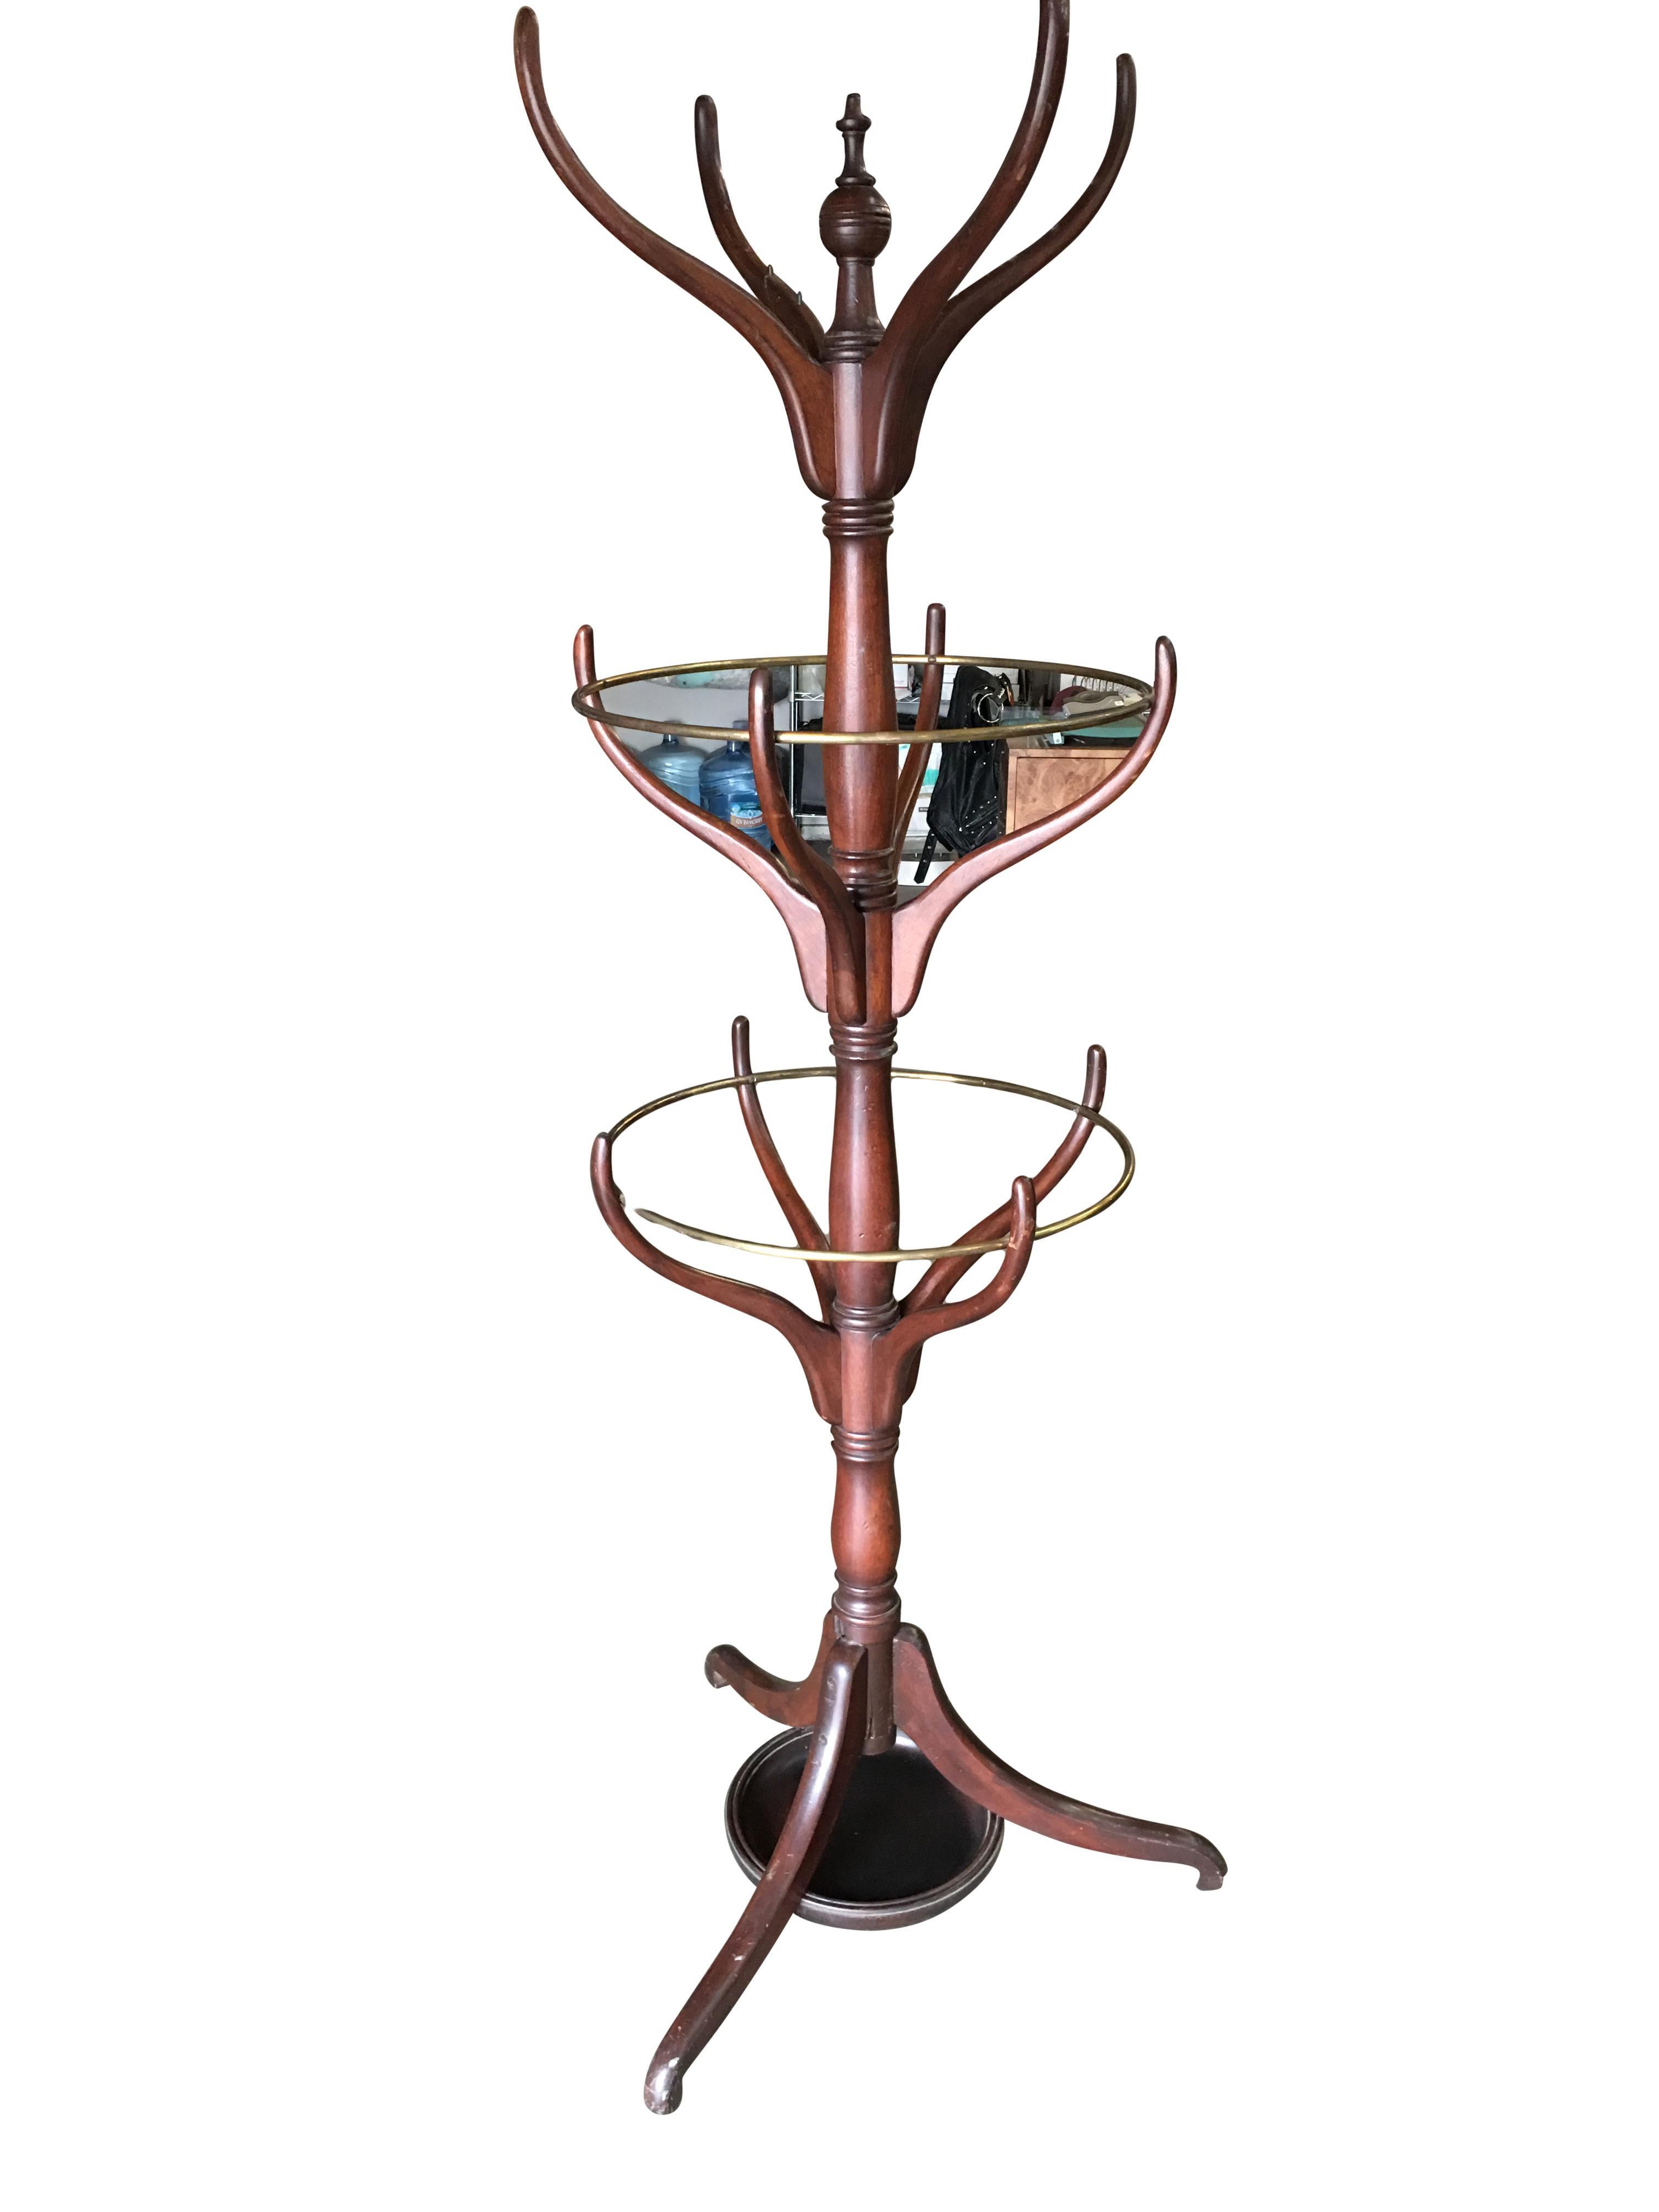 Early 20th century mahogany hall tree with brass hardware featuring placement for coats, hats, as well as umbrellas and canes.